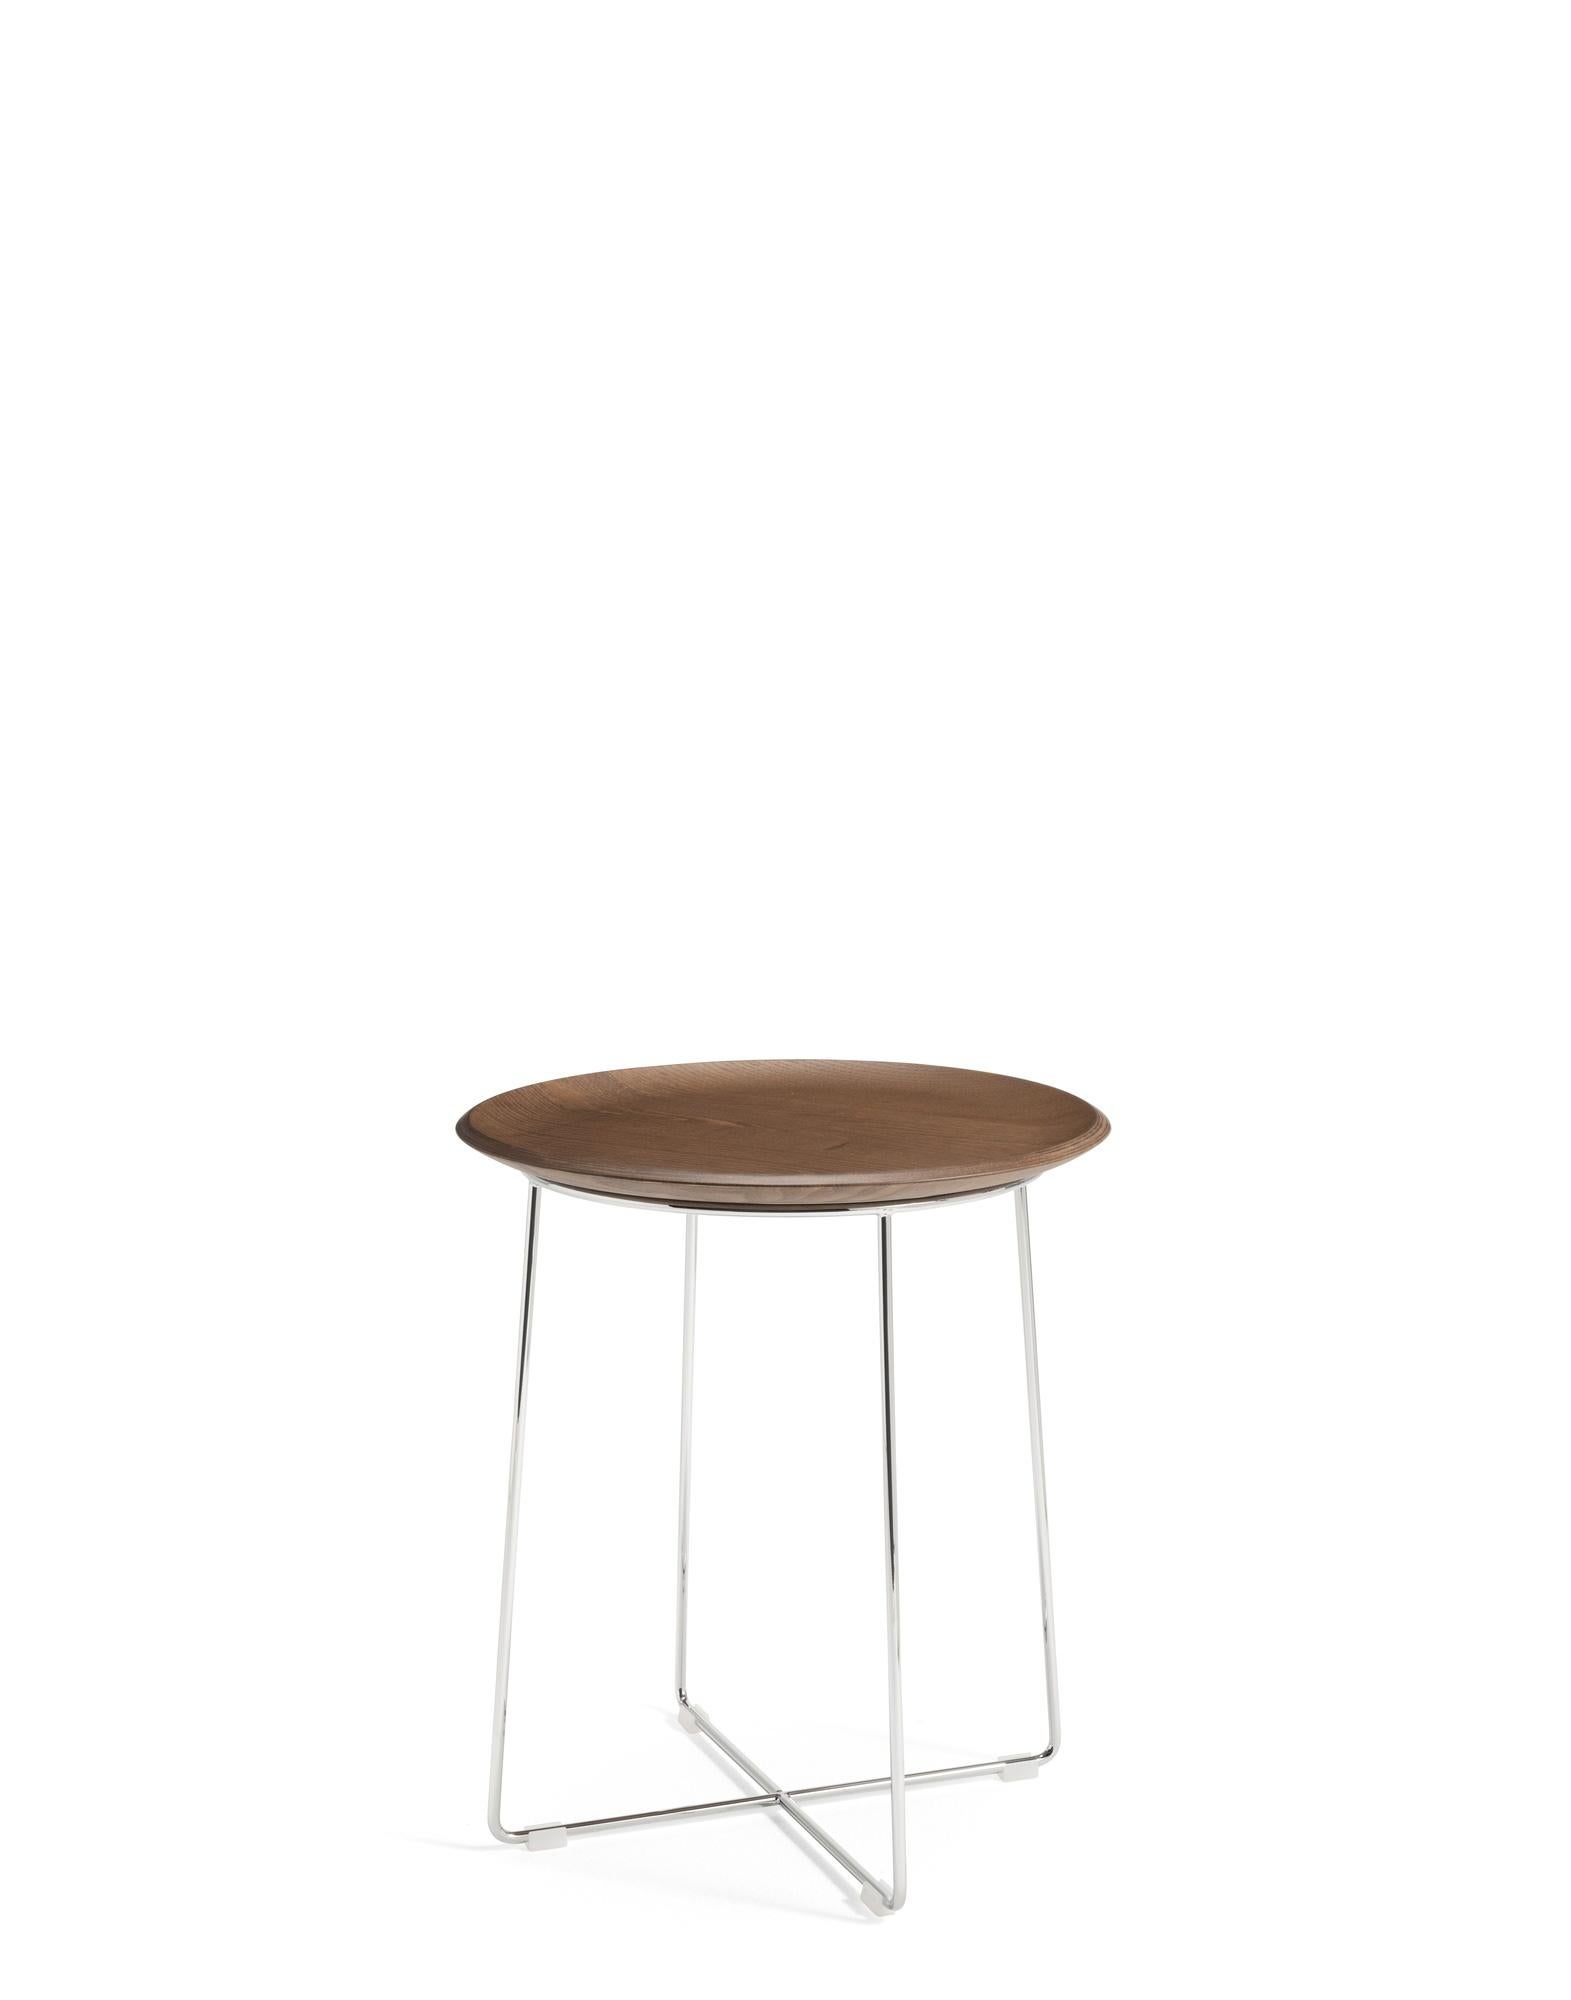 AL wood is a side table which complements the Smart Wood collection. It features a structure made from chrome-plated or painted steel, combined with a curved wooden top. 
A practical, useful piece, Al Wood bring an elegant presence to any room.